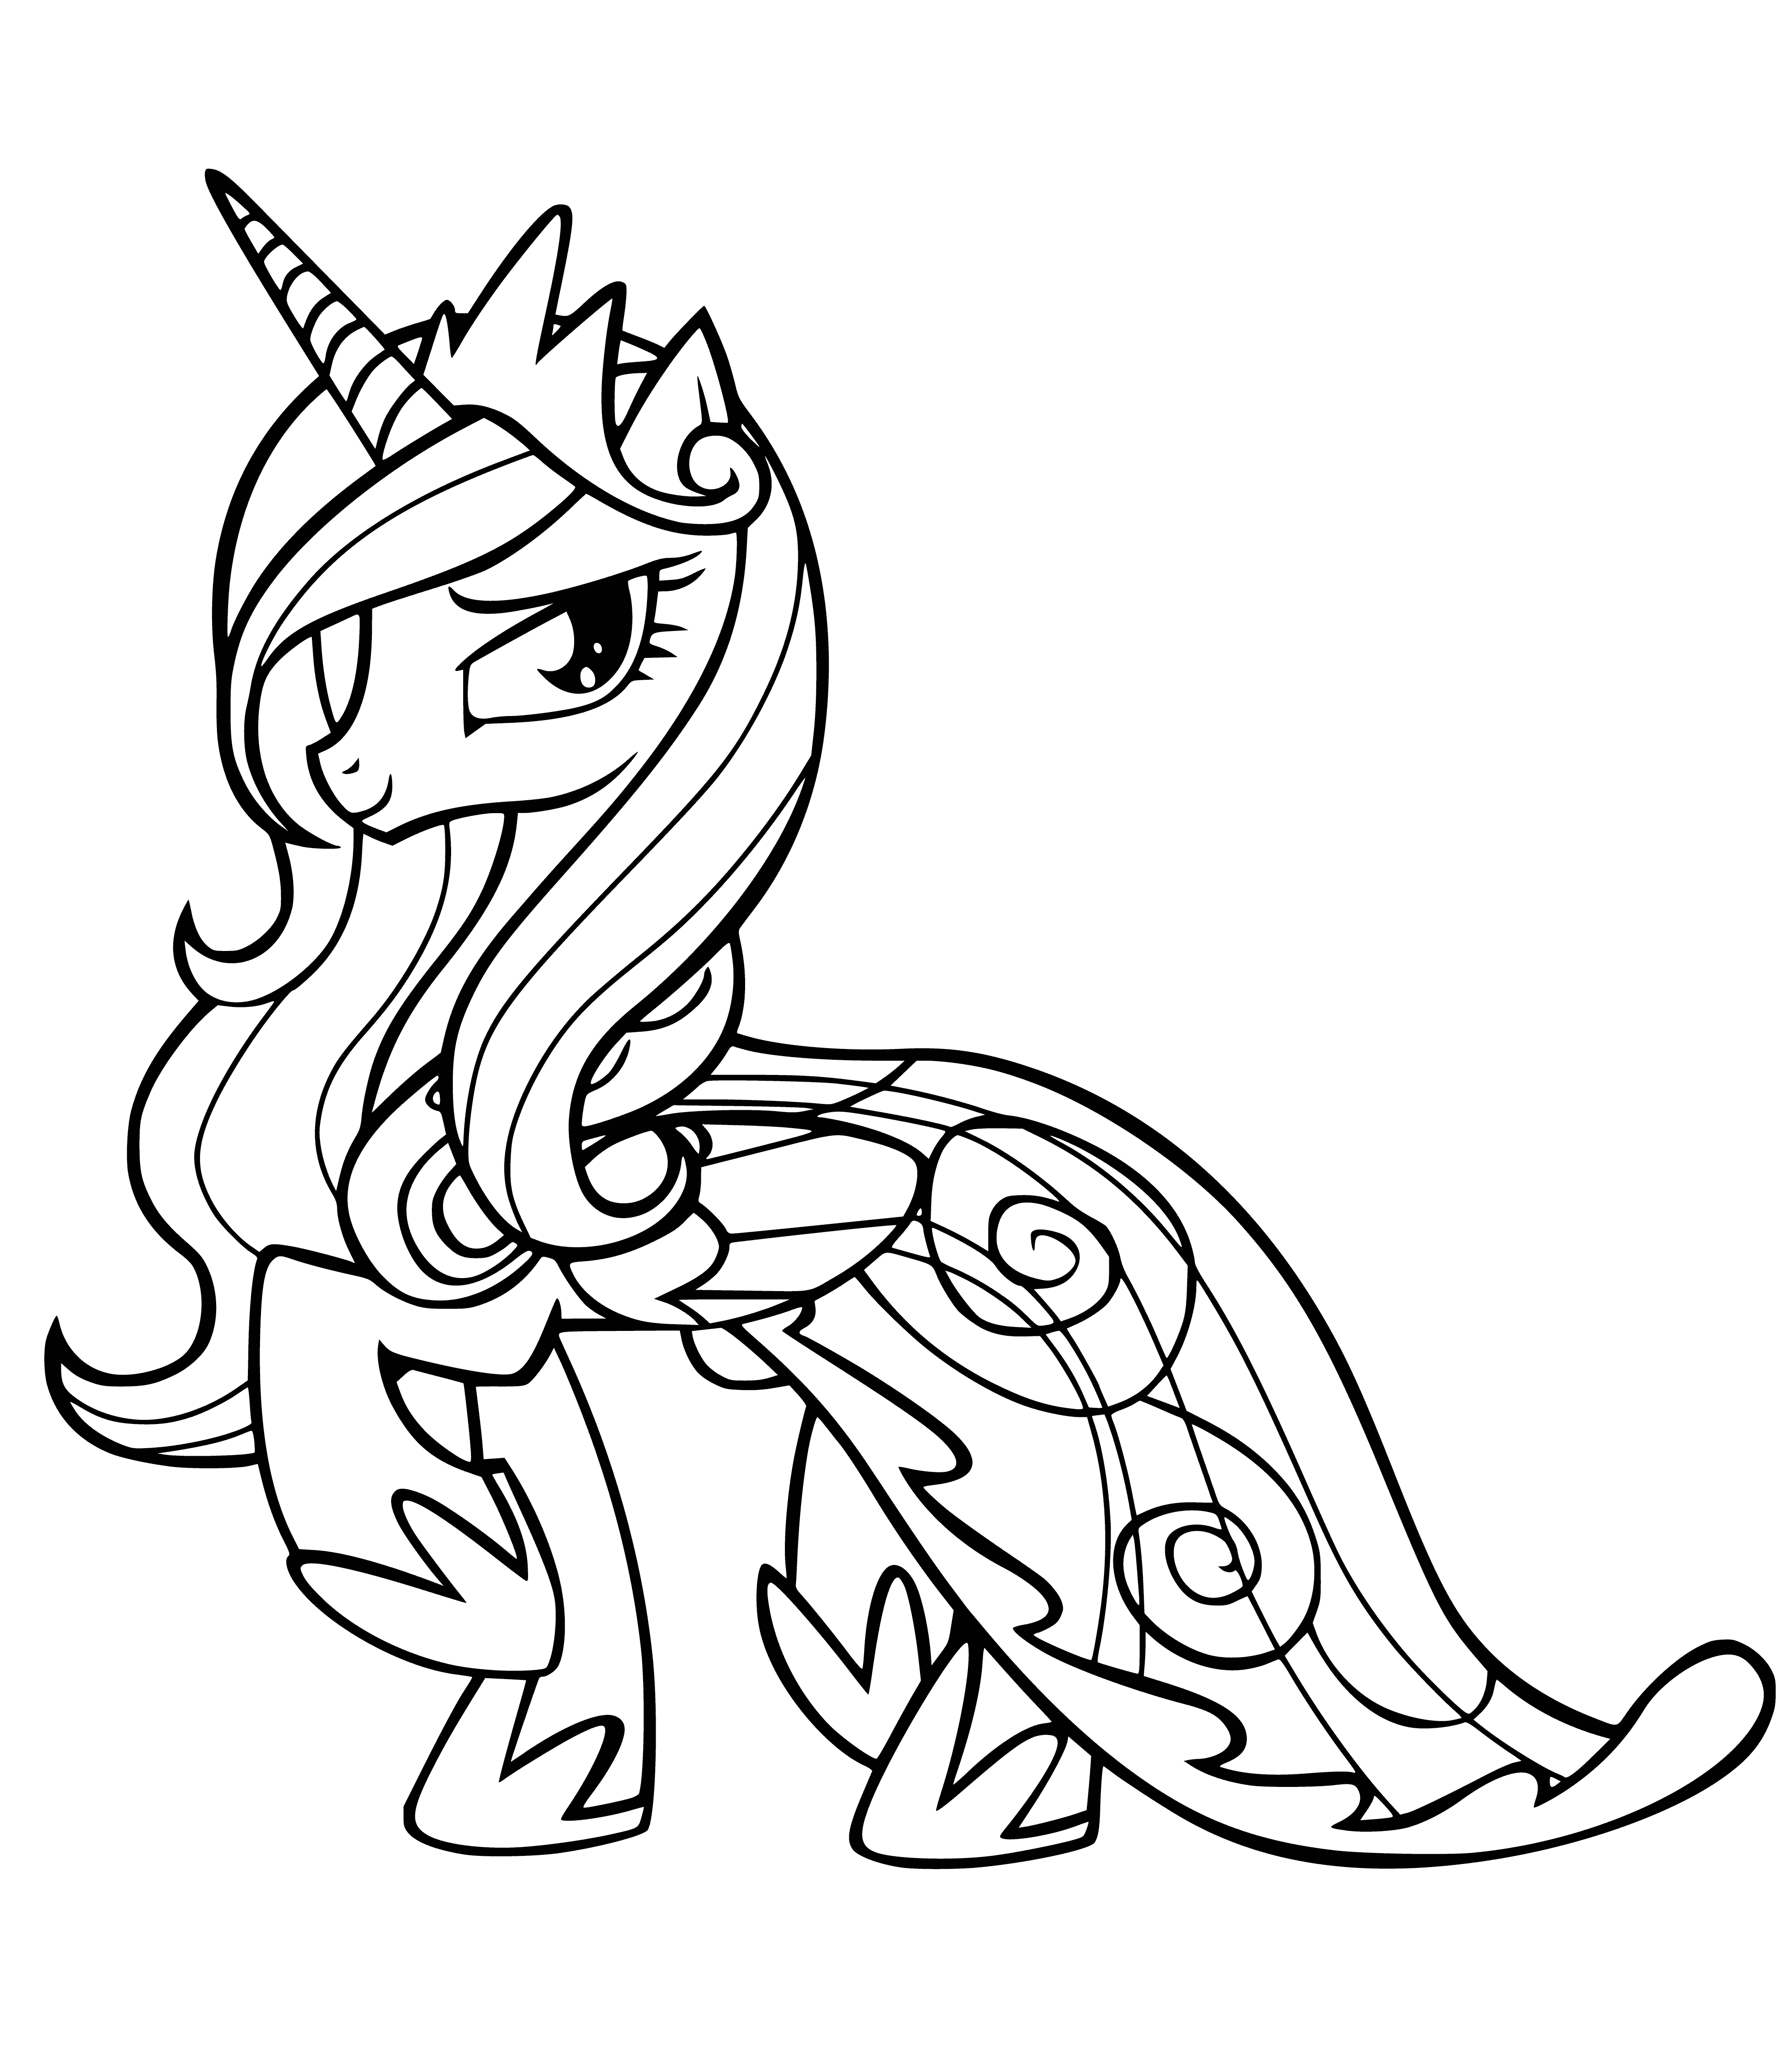 coloring page: Cadance is a light pink pony with a purple mane and tail, holding a crown and wand.